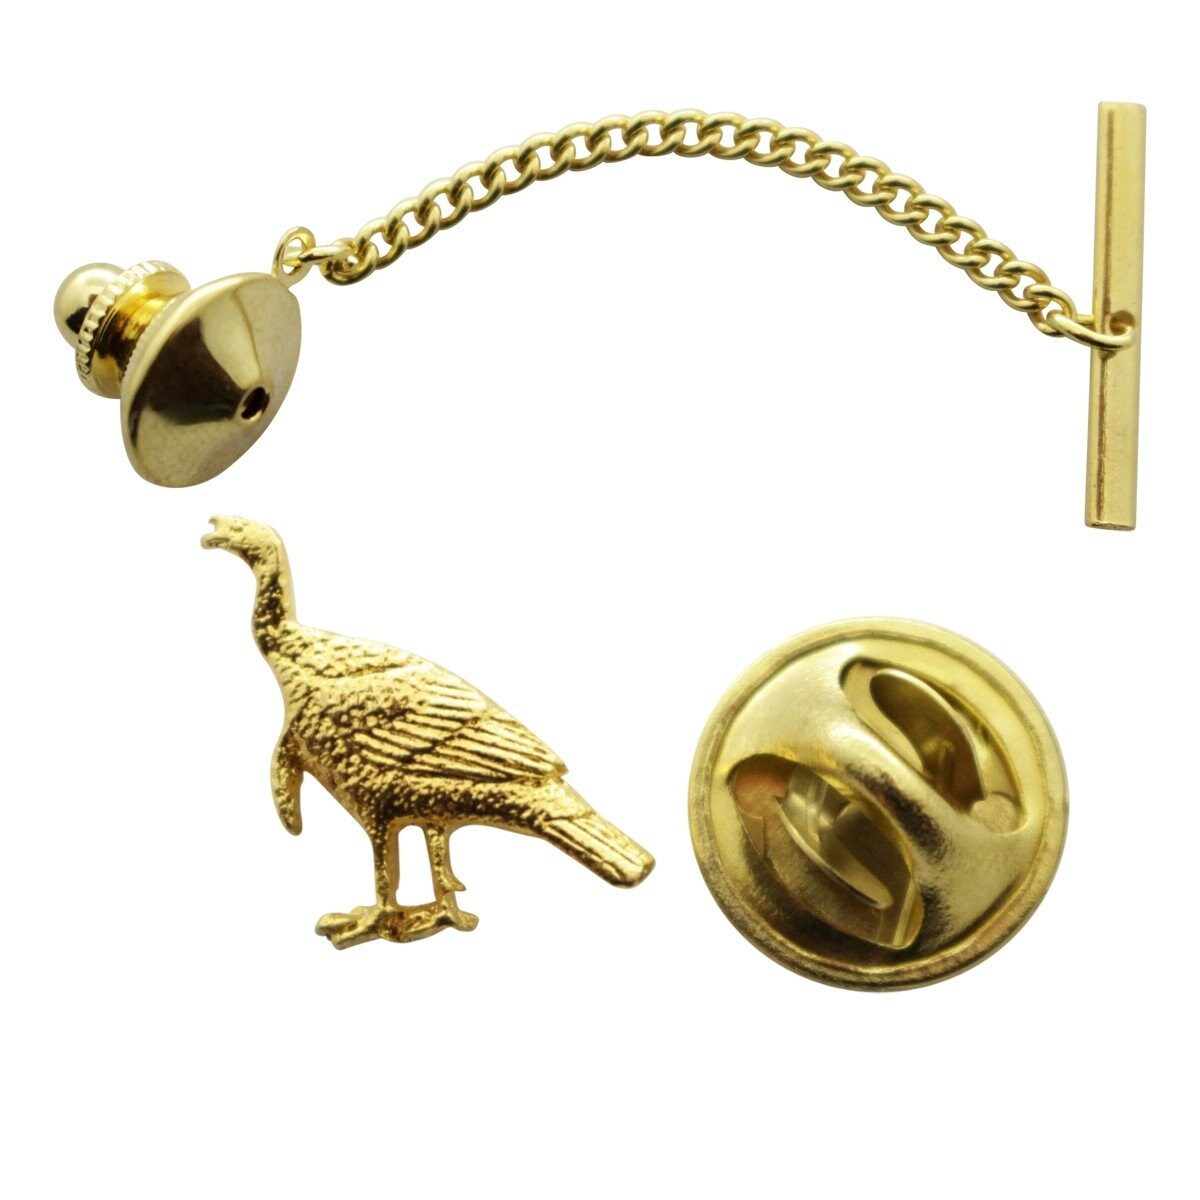 24K Gold Plated Turkey Single Posted Pin Tie Tack 